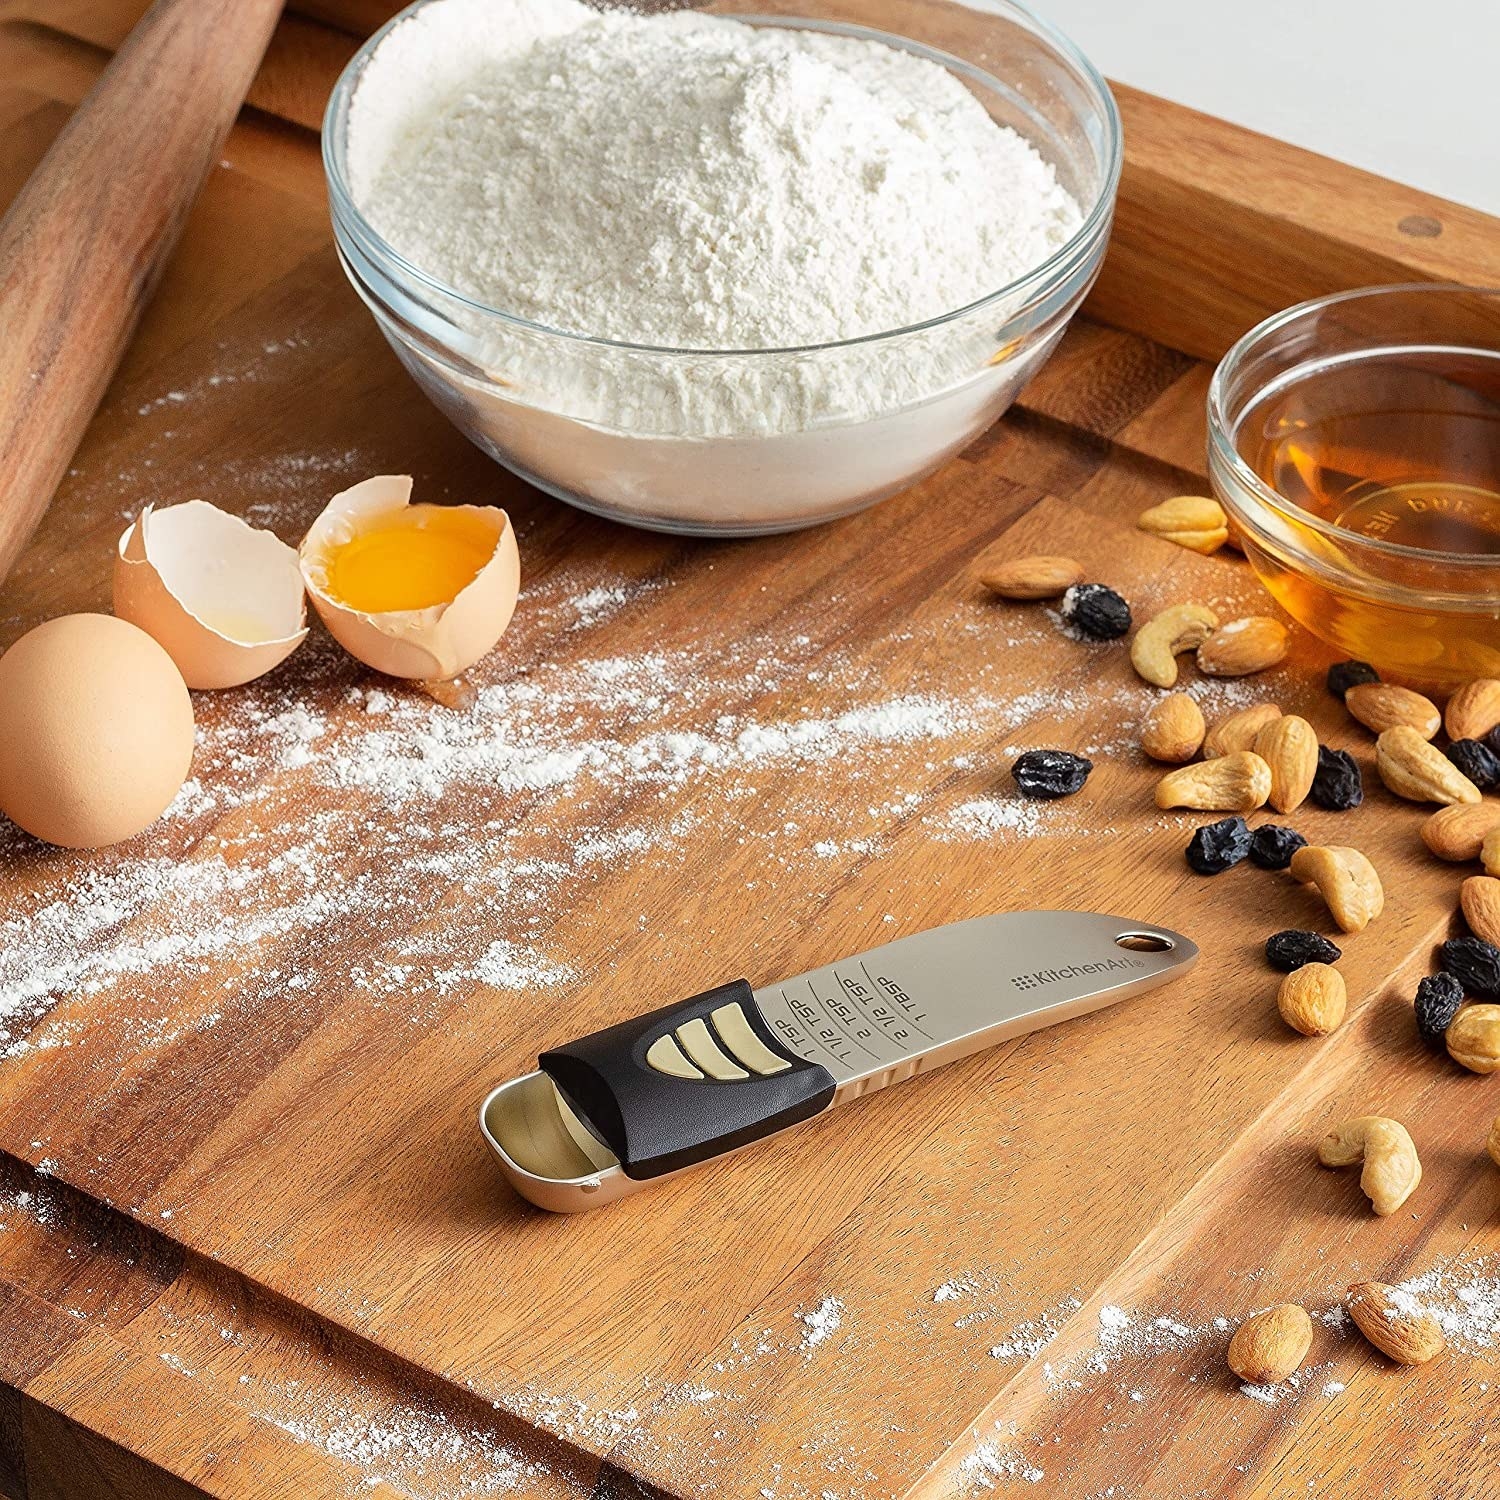 The measurement spoon on a wooden board surrounded by nuts, flour, and eggs